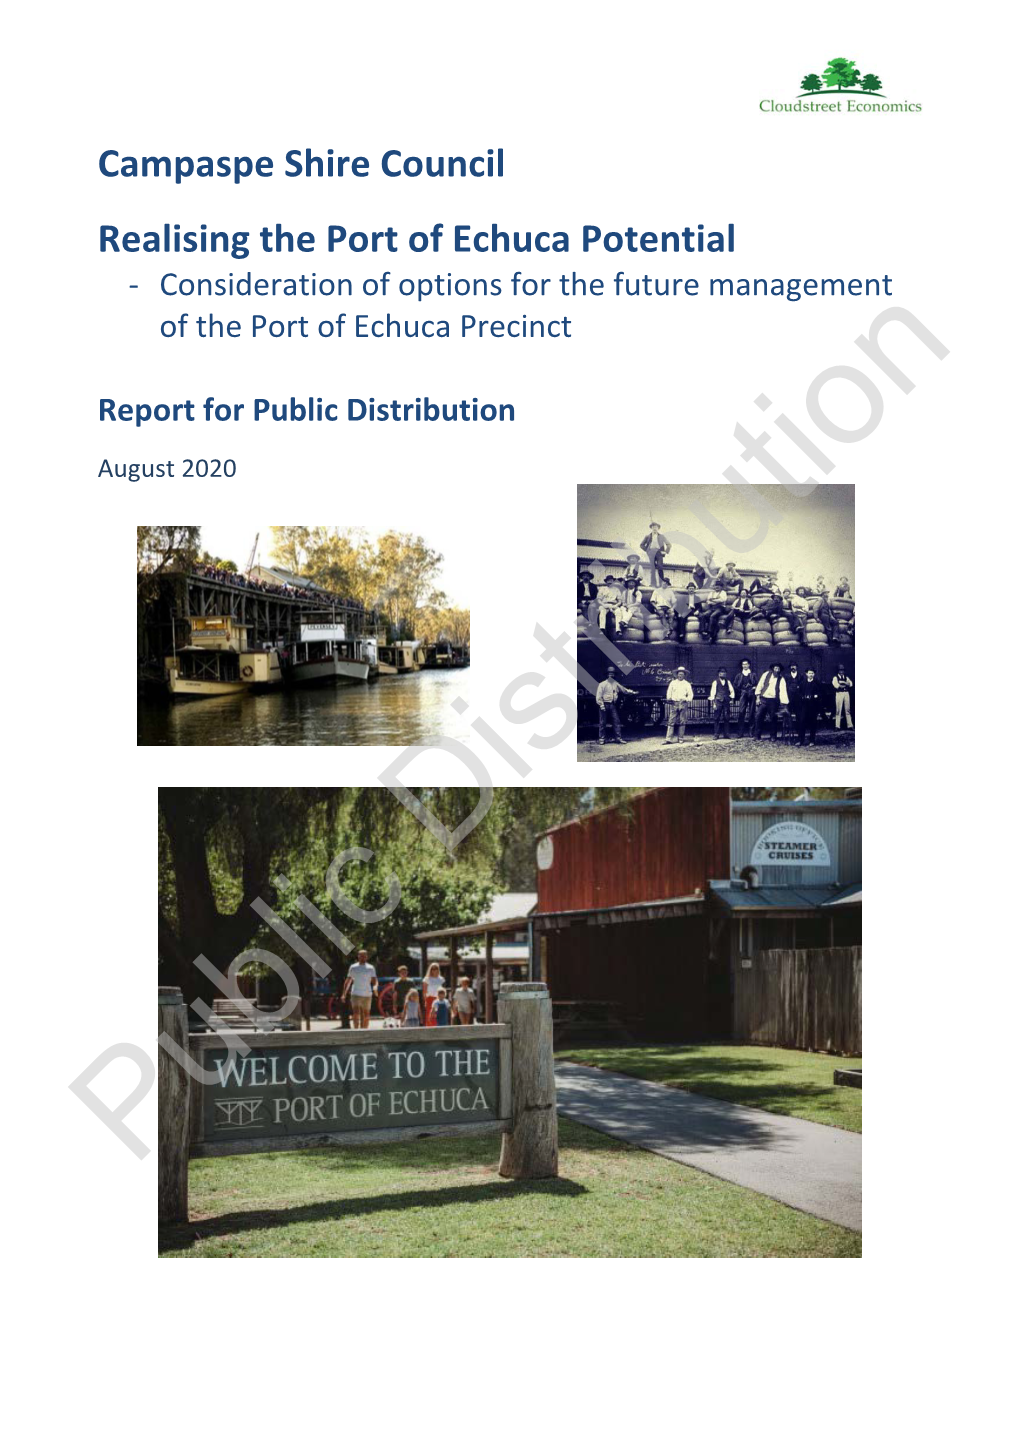 Realising the Port of Echuca Precinct Potential - Consideration of Options for the Future Management of the Port of Echuca Precinct